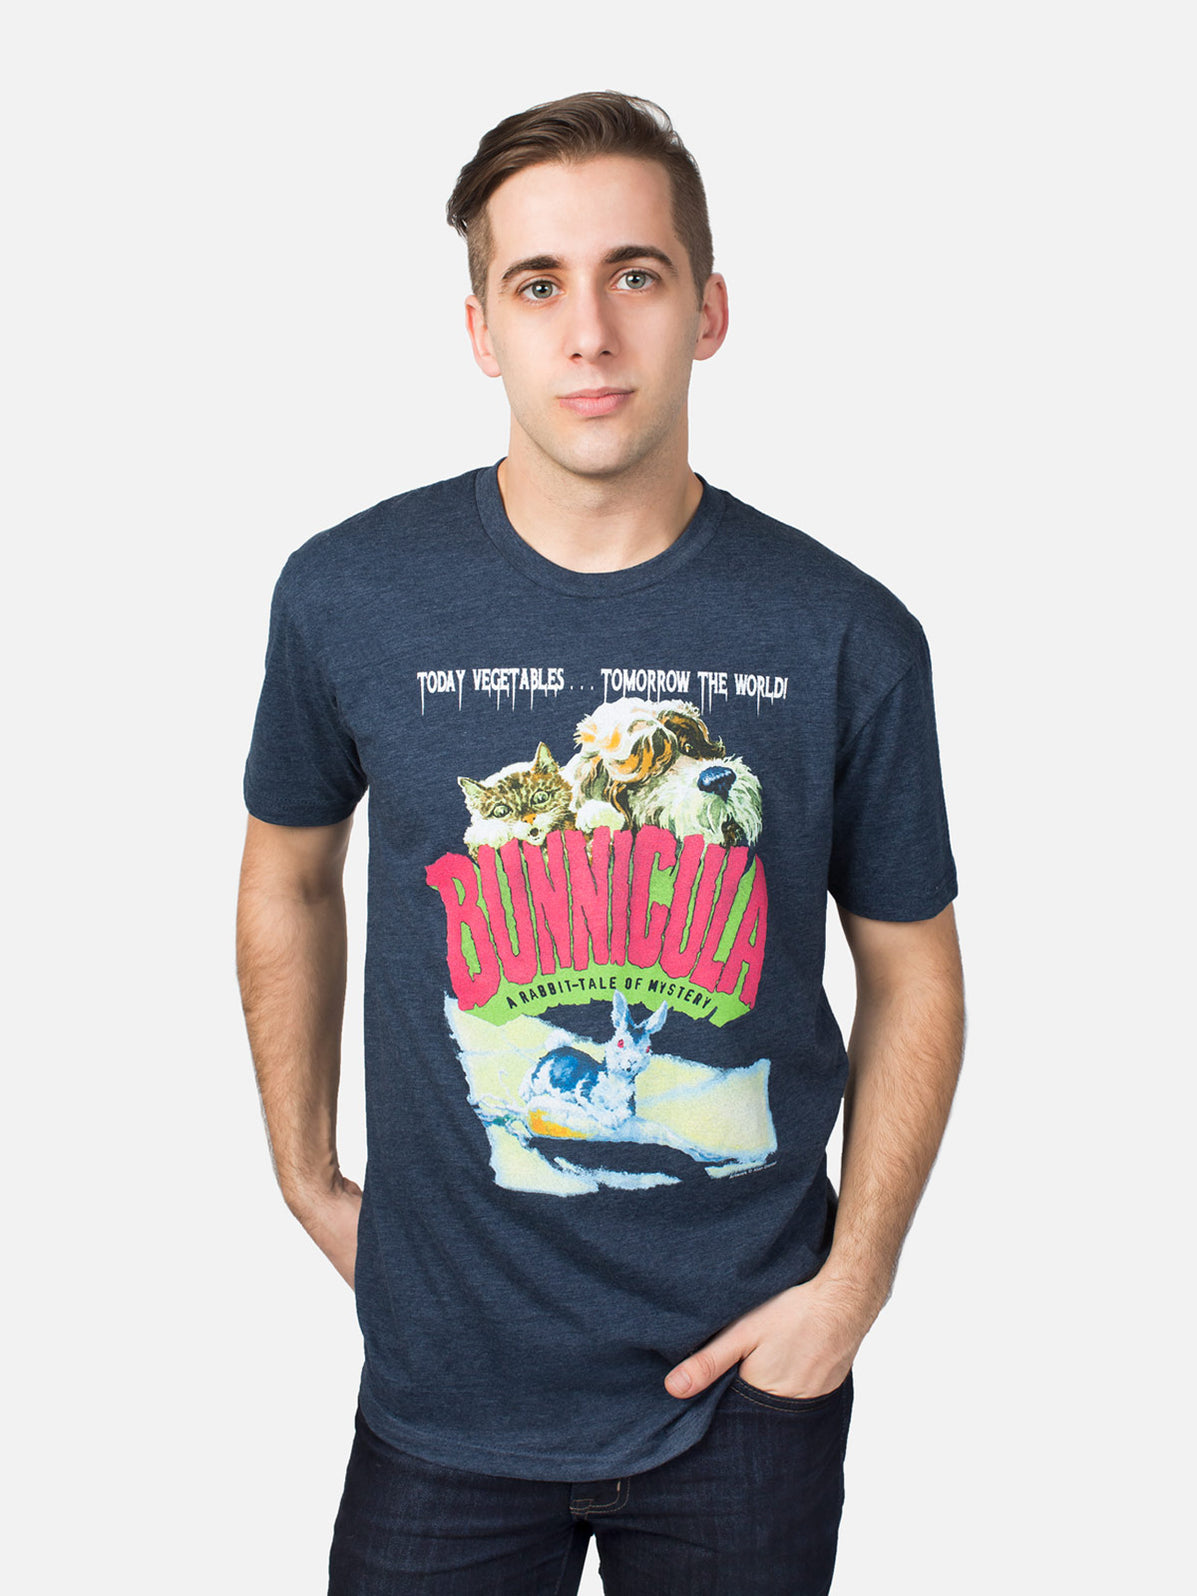 Bunnicula unisex book cover t-shirt — Out of Print